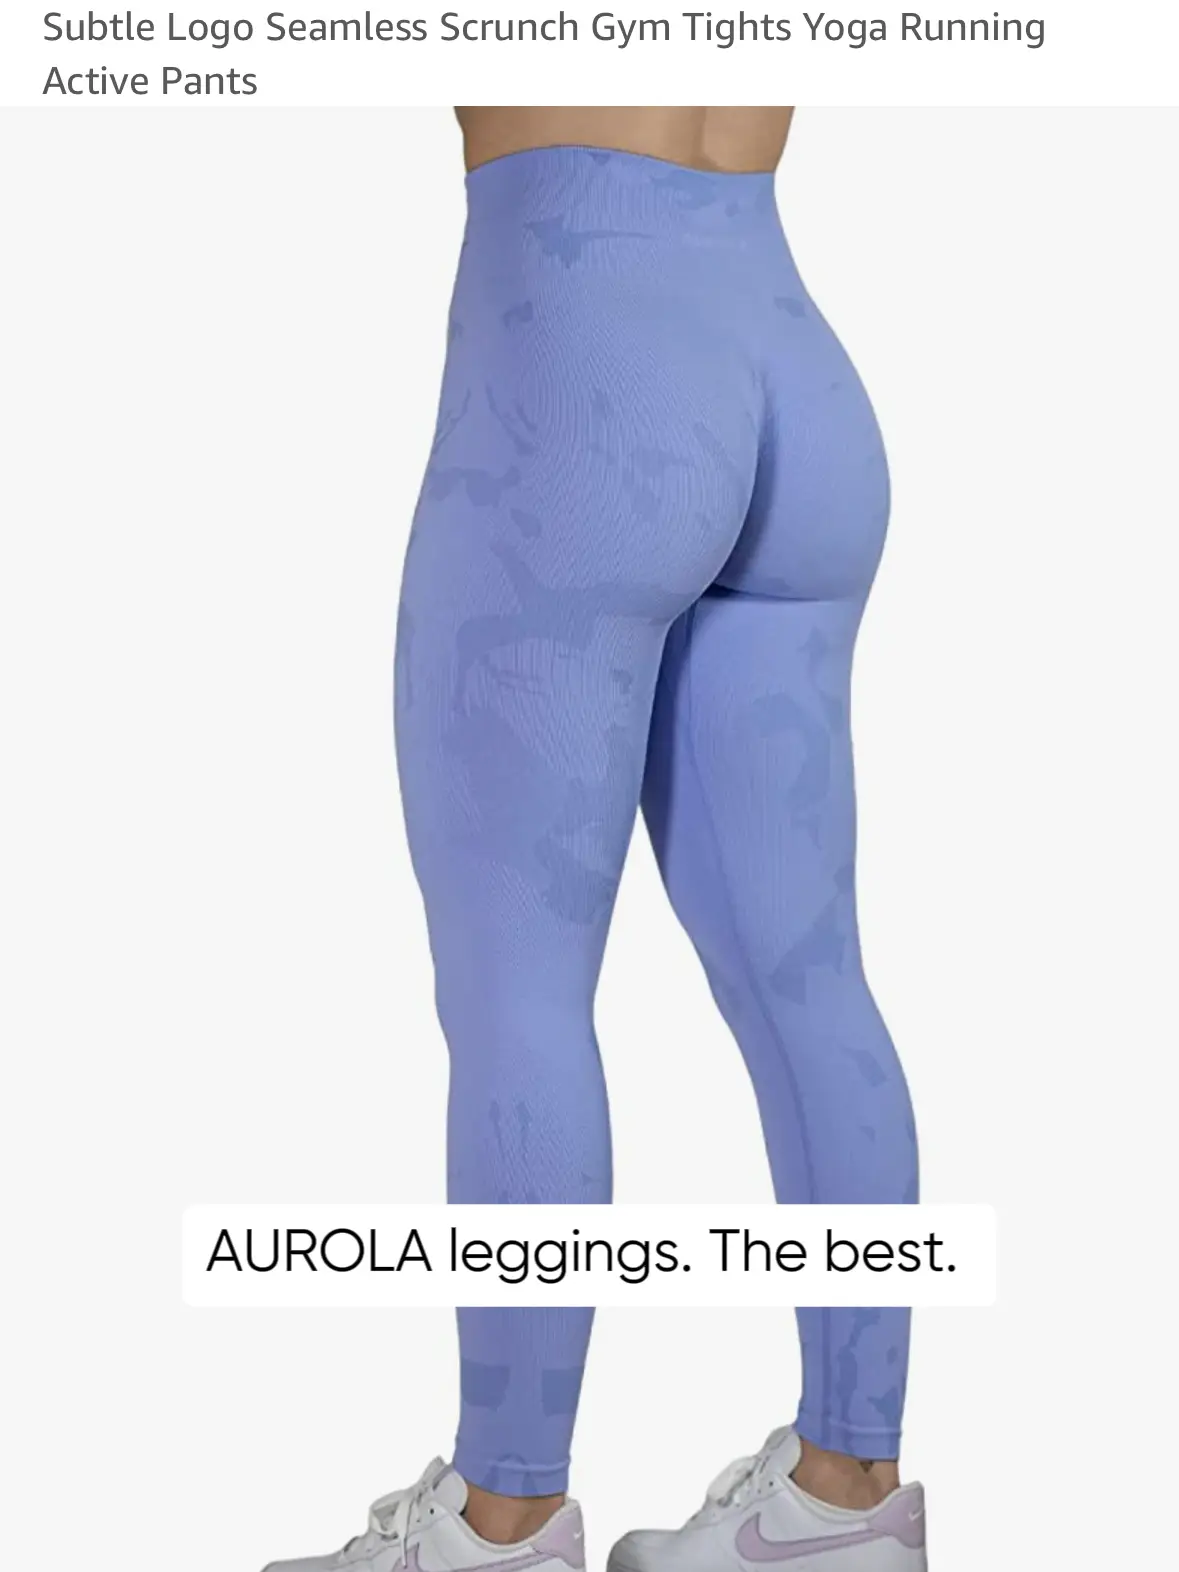 Buy A AGROSTE Scrunch Butt Lifting Seamless Leggings Workout Yoga Pants  Ruched Booty High Waist Leggings Compression Tights, #1 Upgrade Black,  Medium at